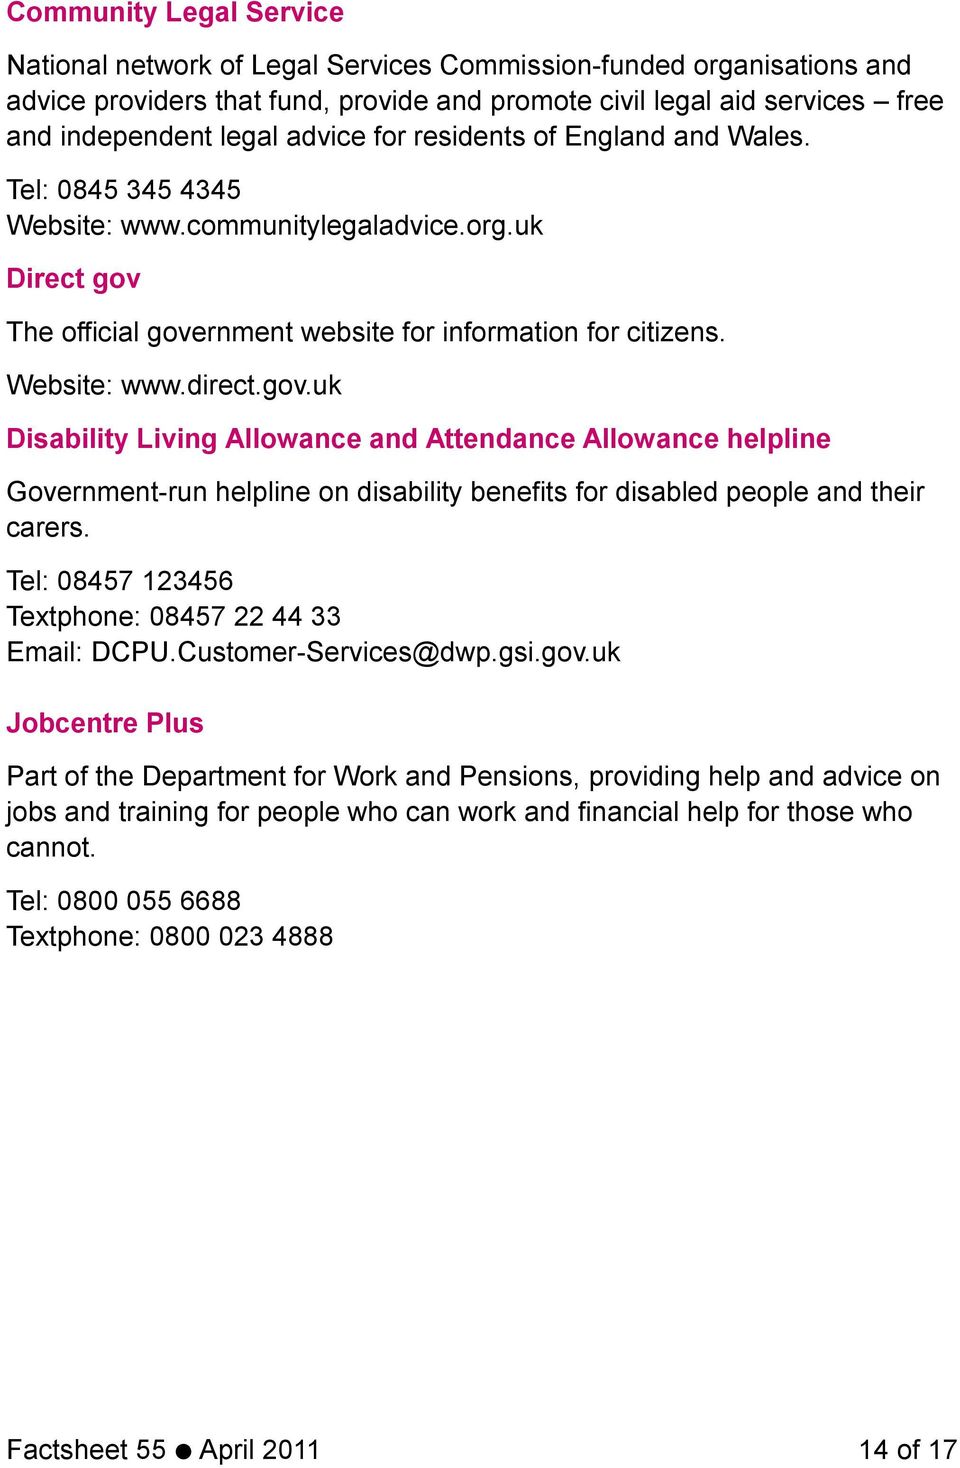 The official government website for information for citizens. Website: www.direct.gov.uk Disability Living Allowance and Attendance Allowance helpline Government-run helpline on disability benefits for disabled people and their carers.